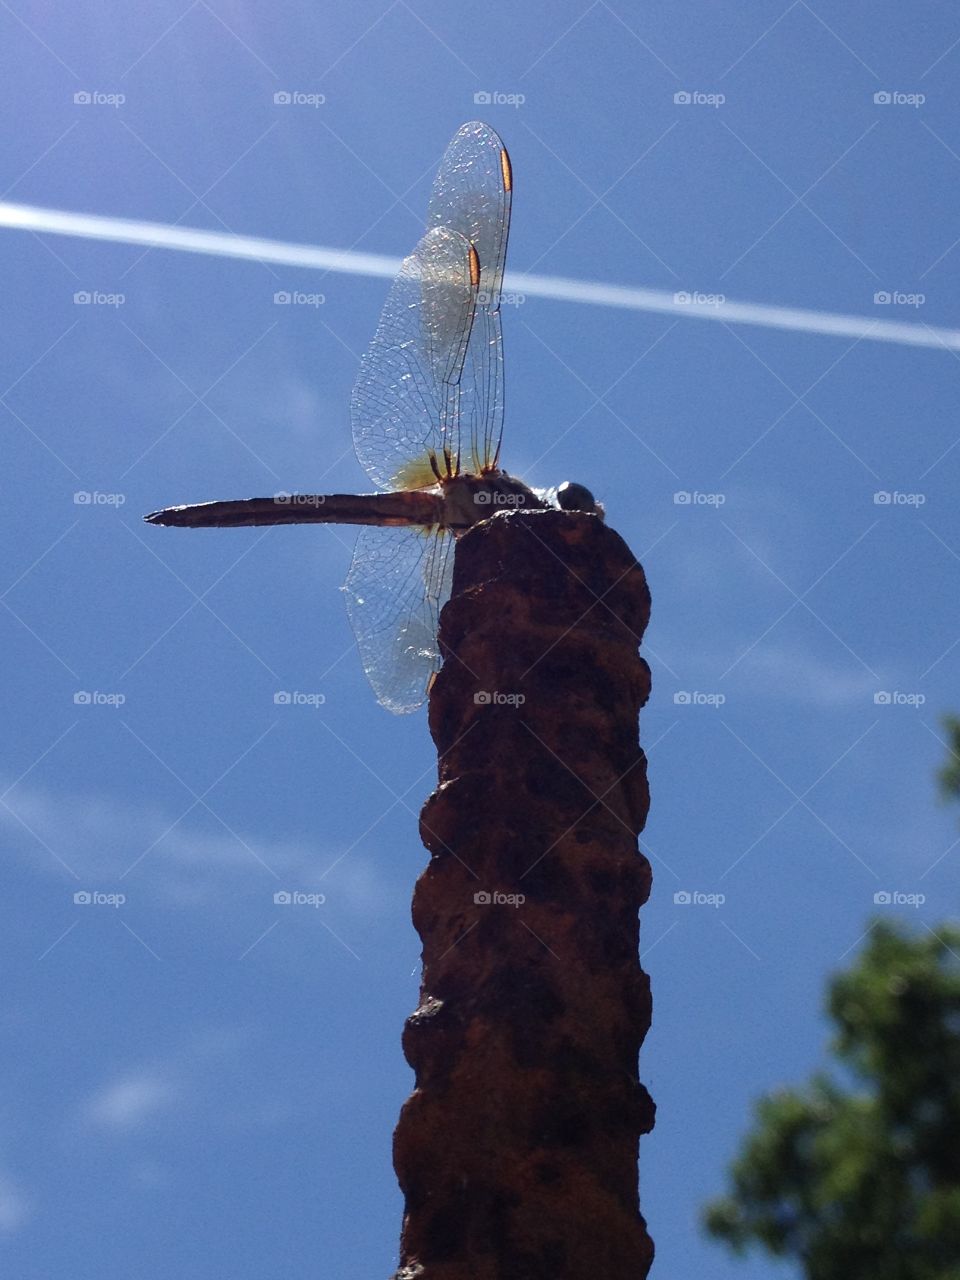 Dragonfly on rebar, pic from below with contrail in blue sky.